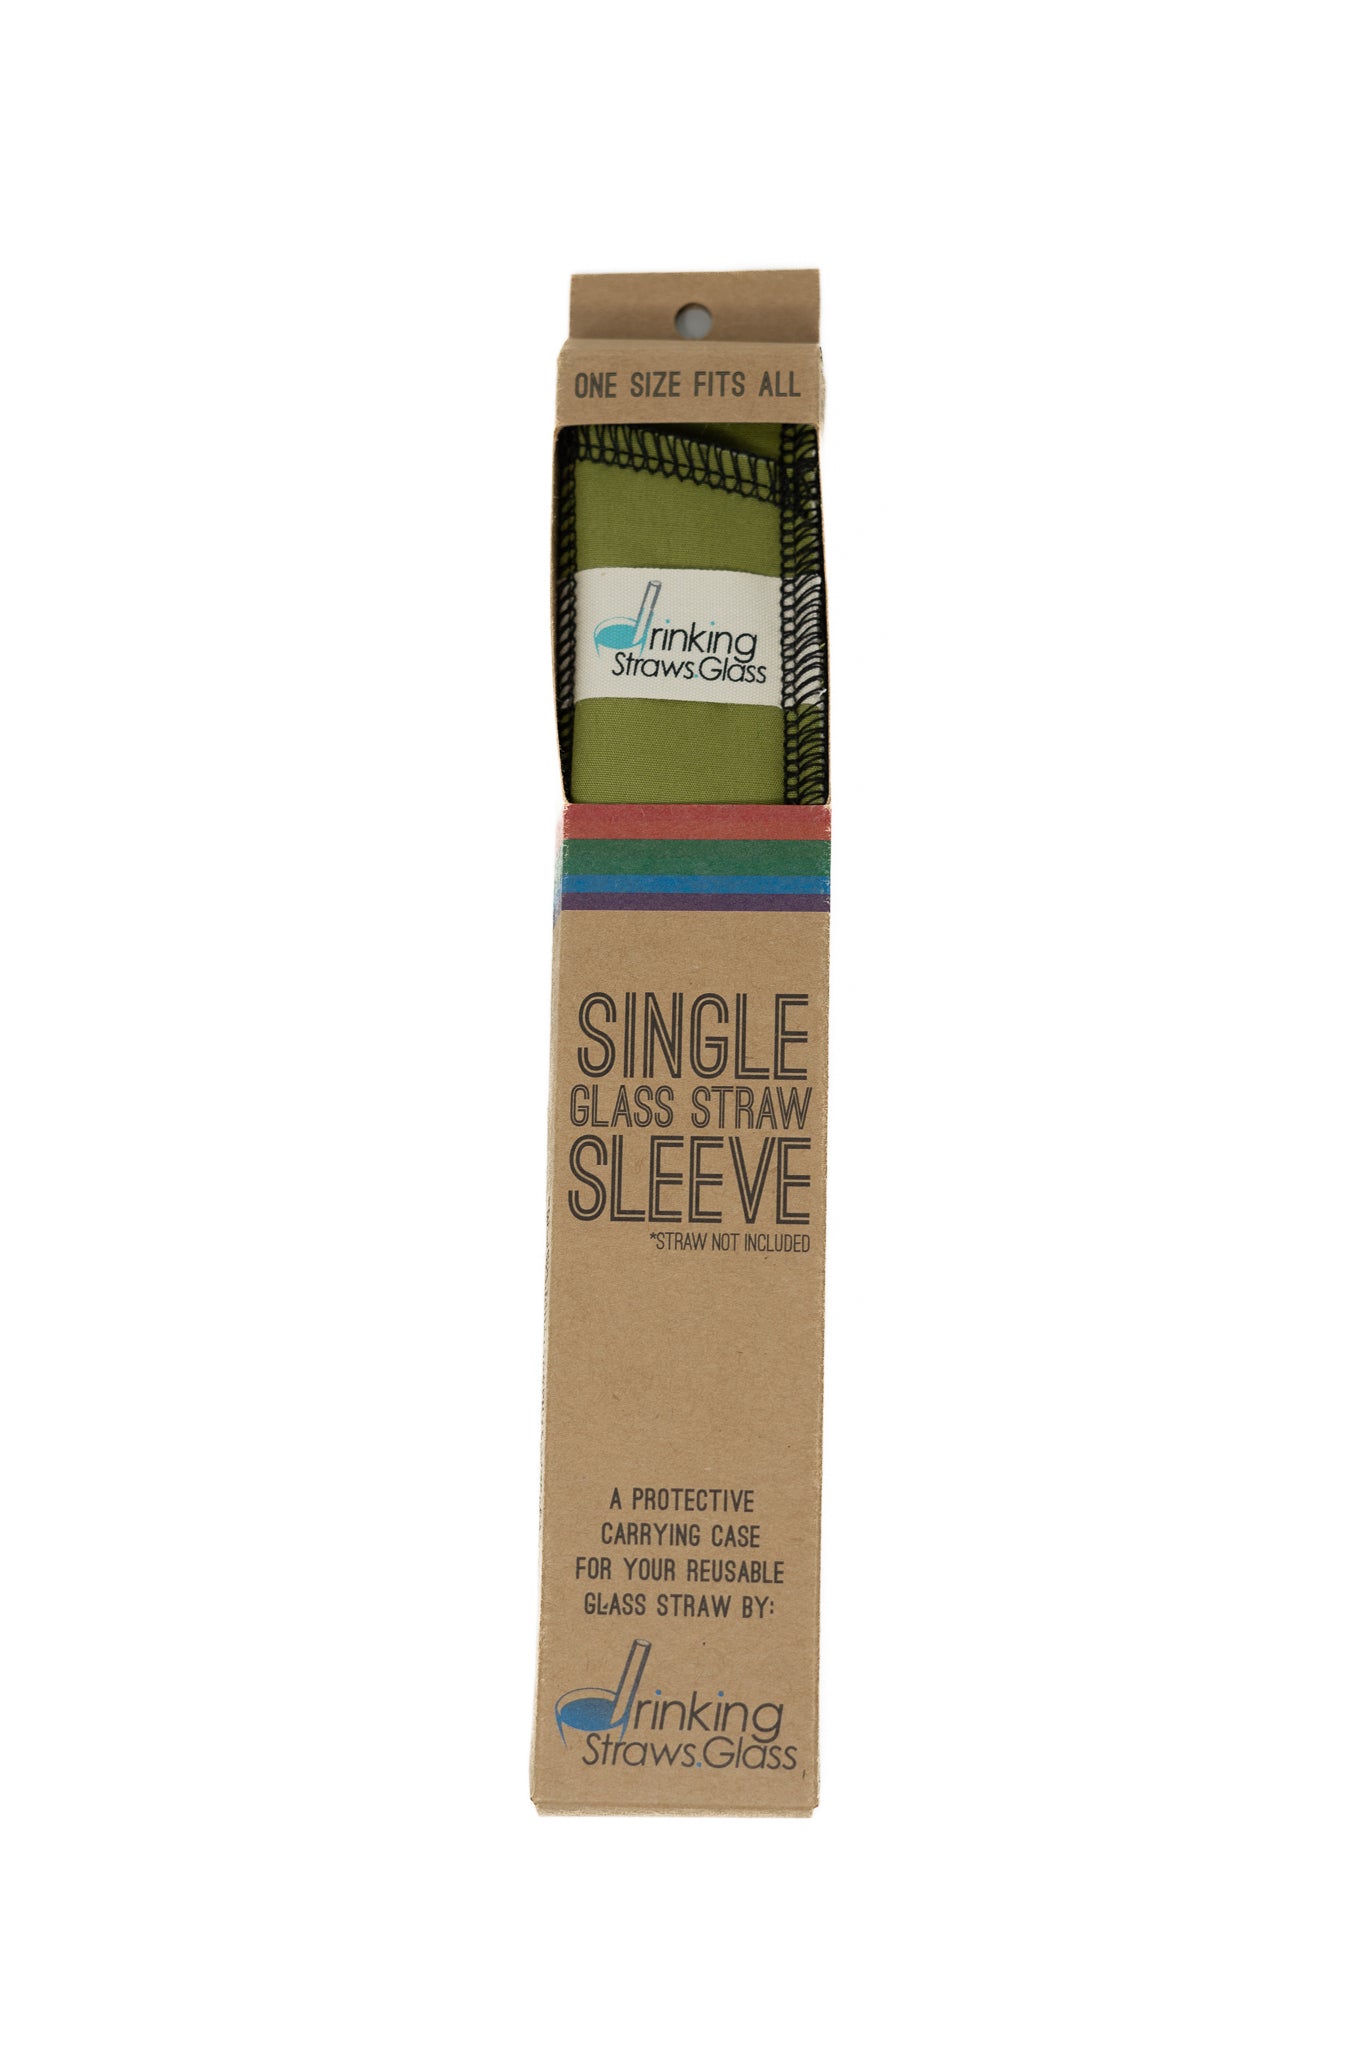 Single Glass Straw Sleeve (Multiple colors)